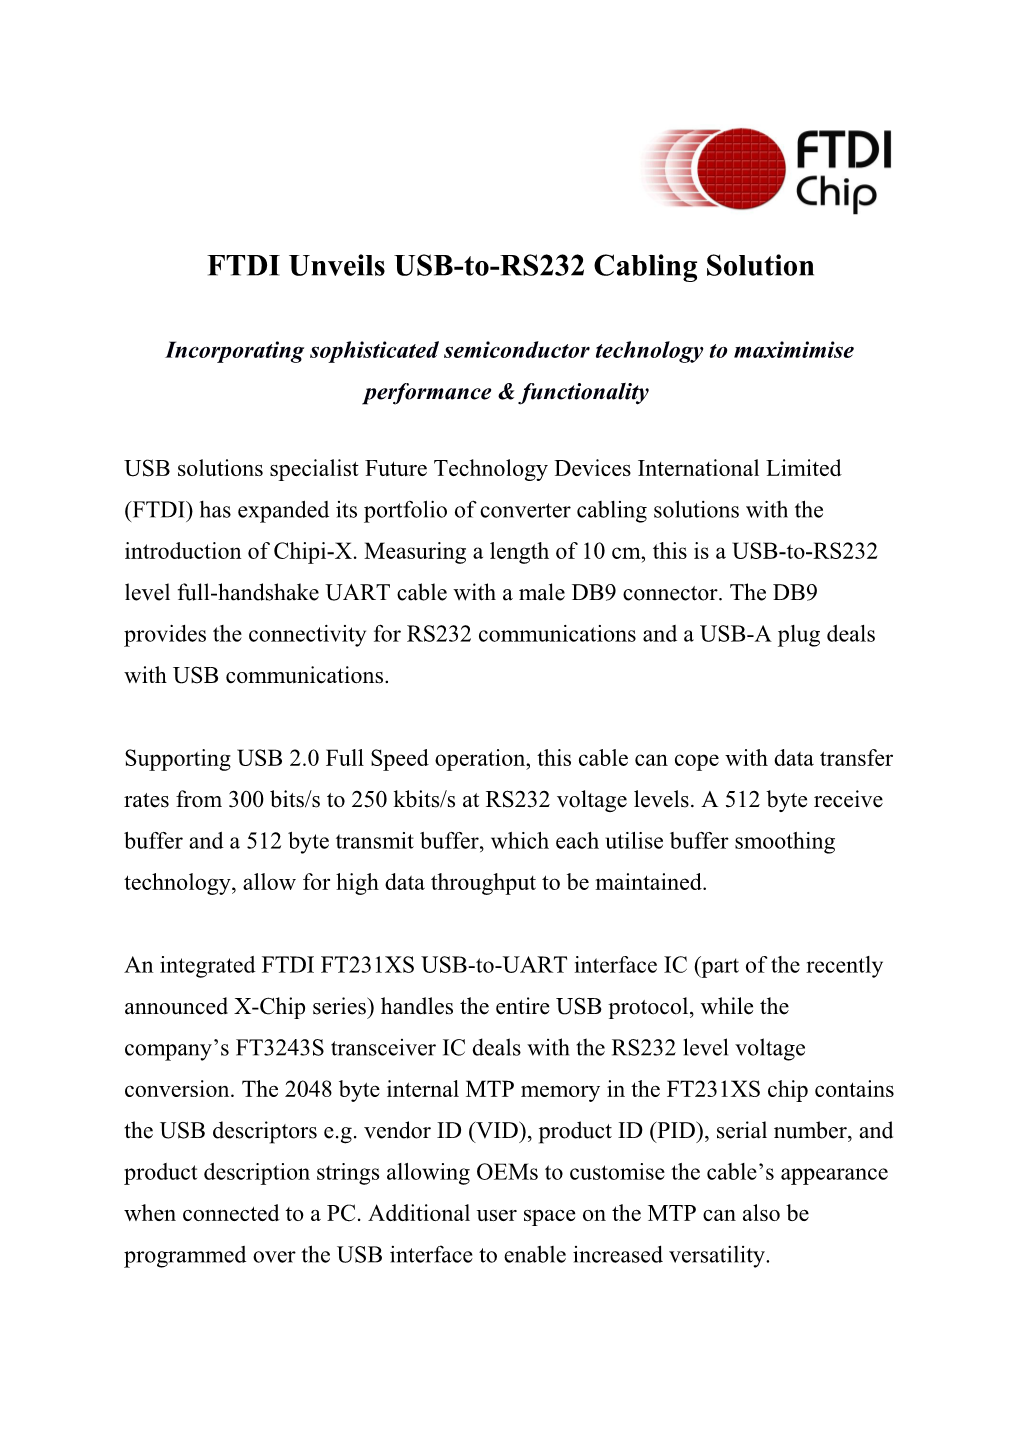 FTDI Unveils USB-To-RS232 Cabling Solution